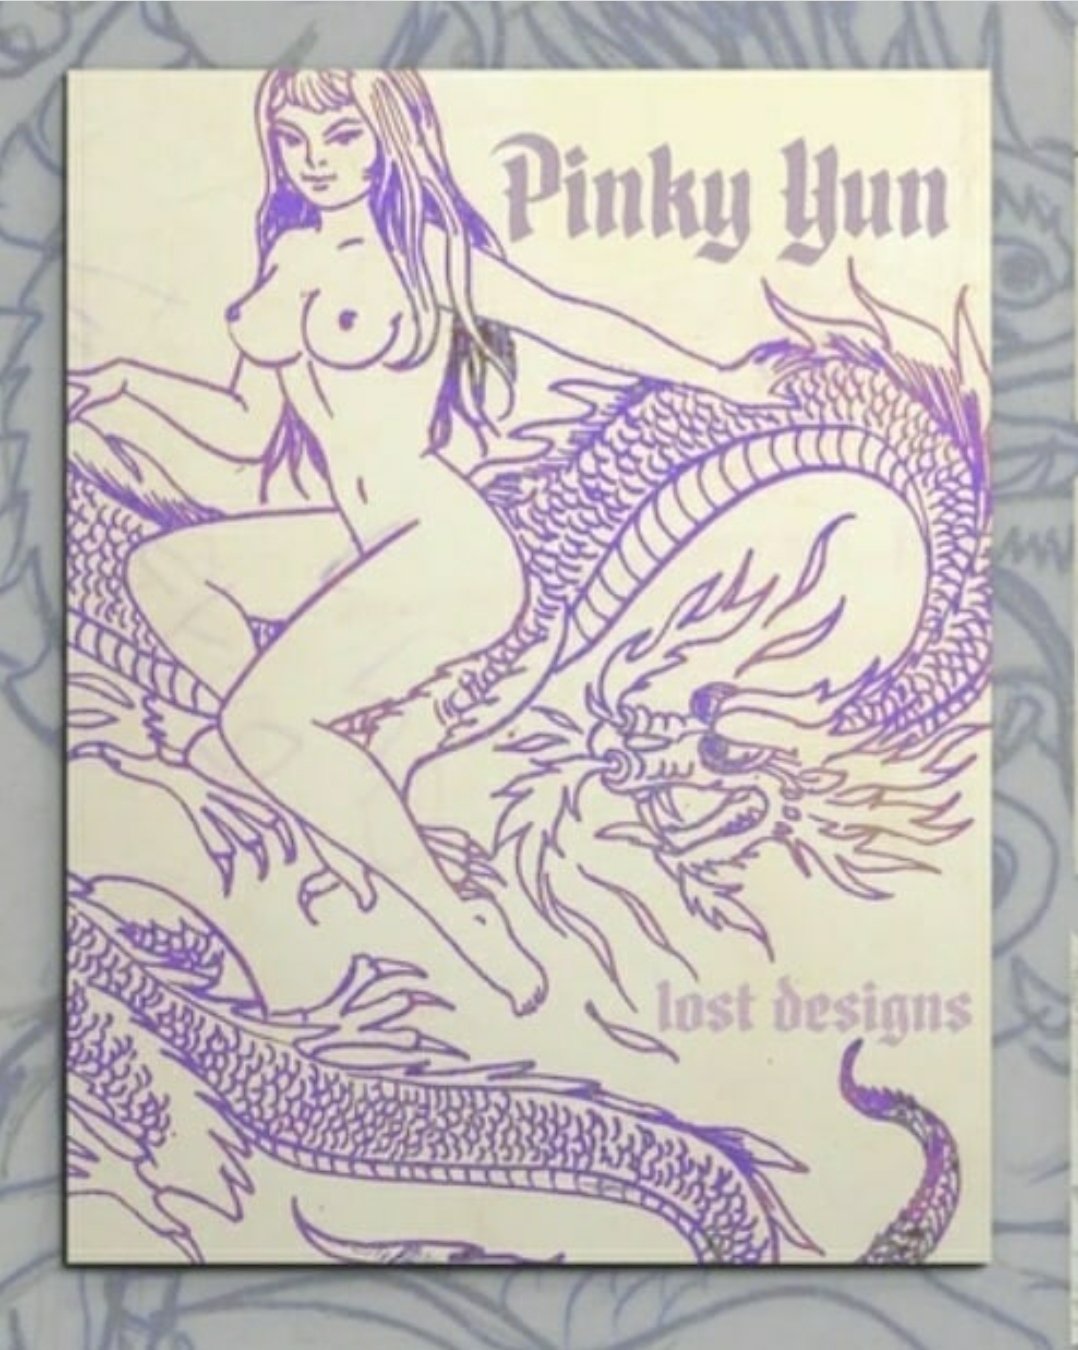 THE LOST DESIGNS OF PINKY YUN